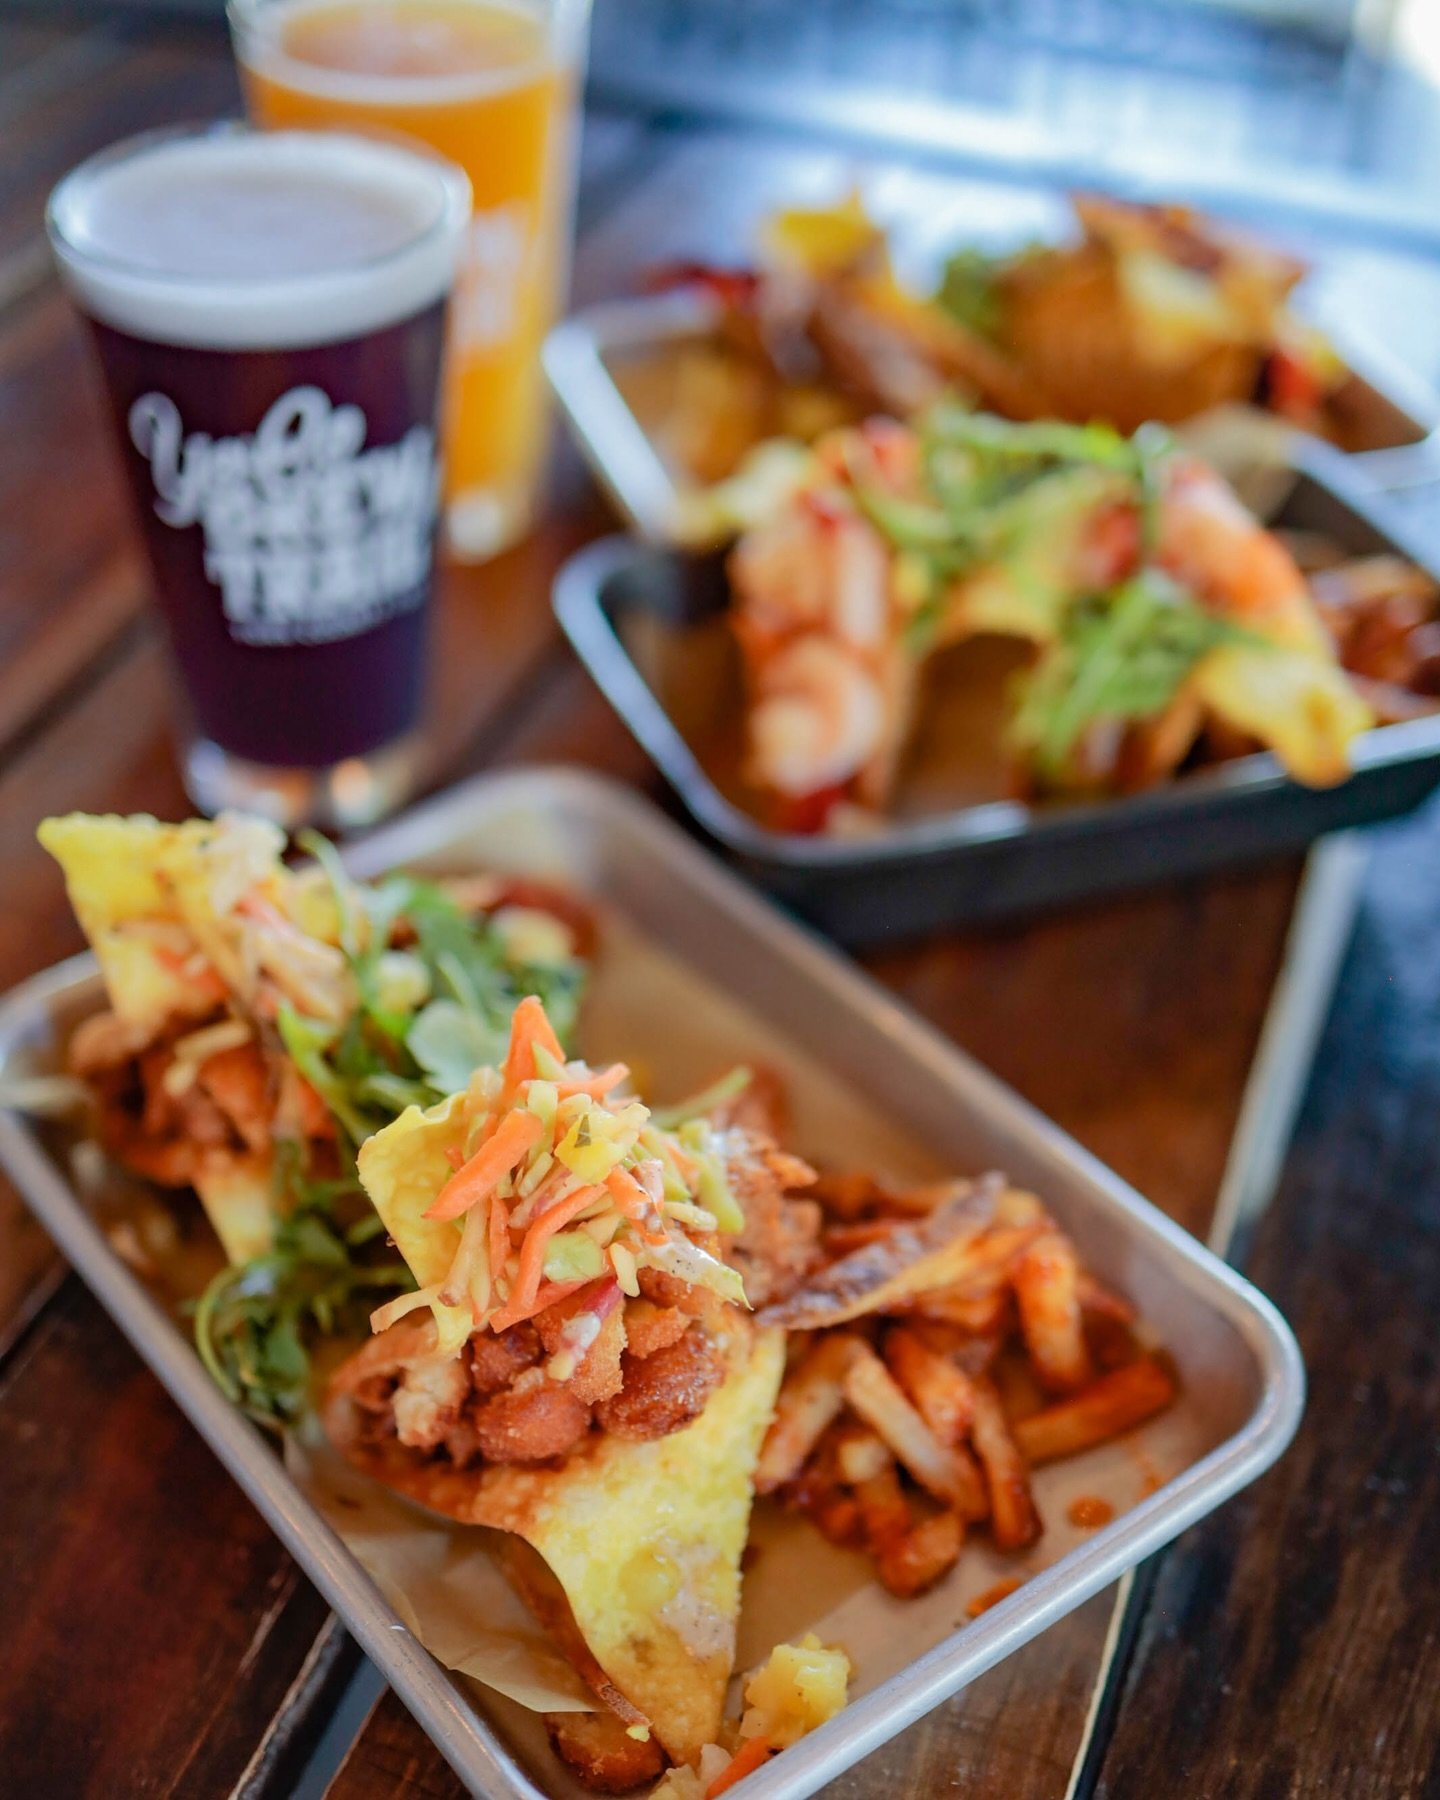 Tostadas &amp; Trivia on deck! Rounds start at 7pm with prizes for the top 3 teams. 

🍺 4-10pm
🌮 WEEKLY TOSTADA: Buffalo Chicken 2 for $10
🌀 @twistedeatstruck 4-9pm
🤔 Trivia 7-9:30pm

📸: @visityorkcountysc